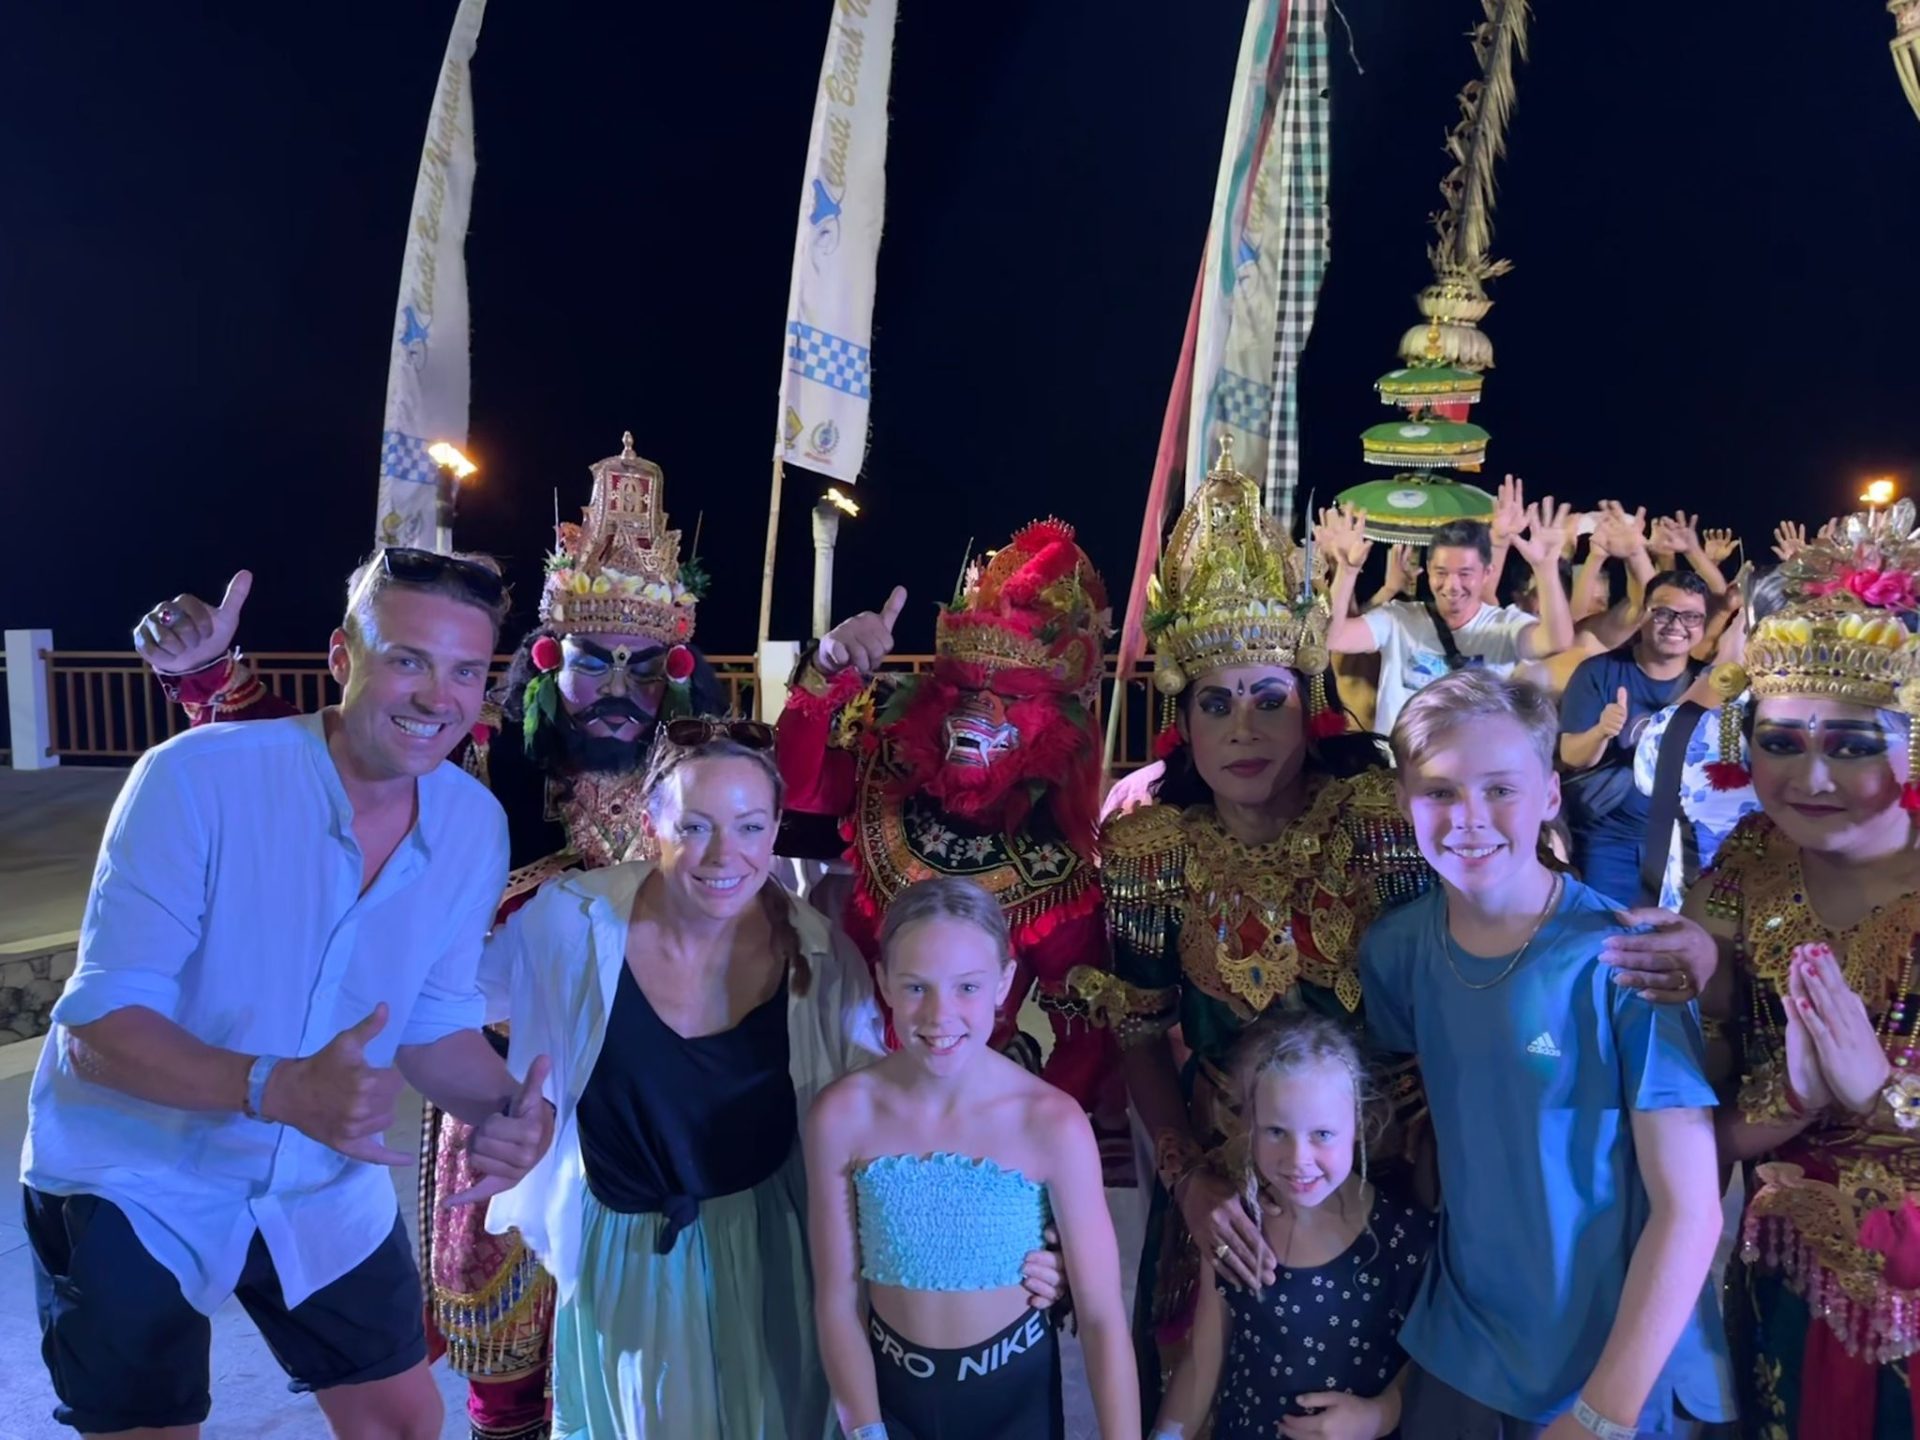 UK expat family living Bali - Our Year in Bali